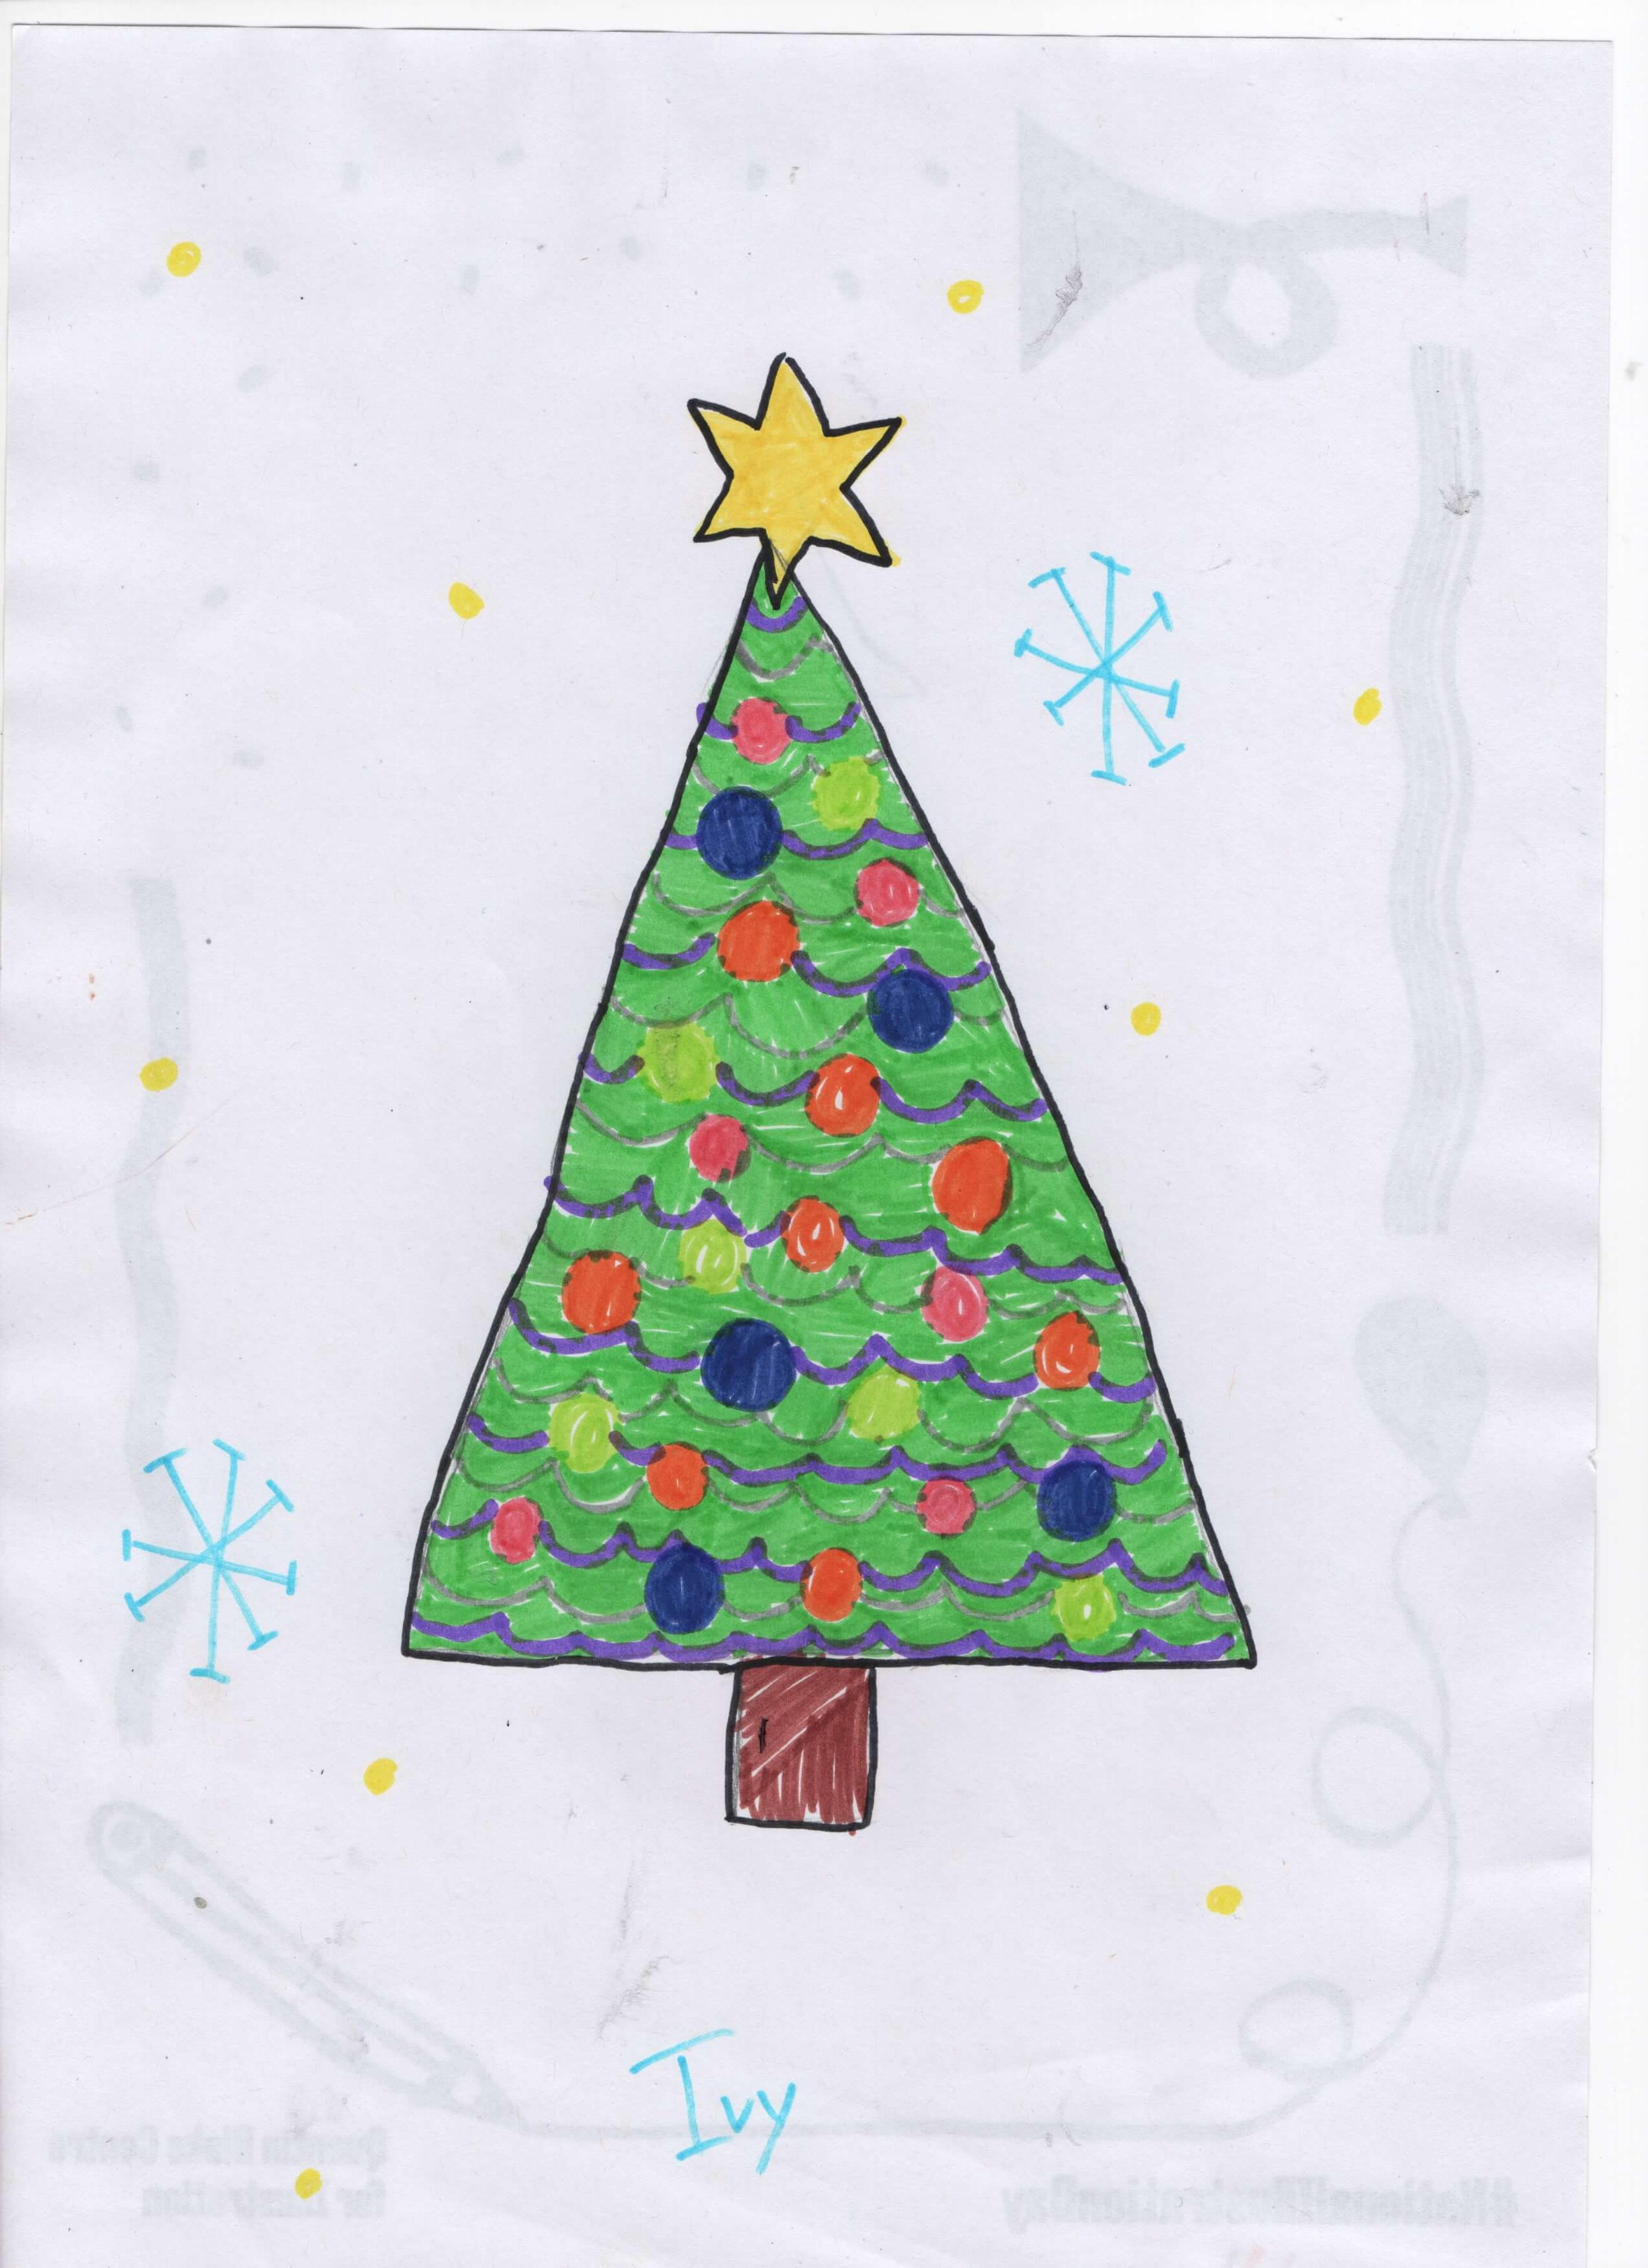 A child's drawing of a decorated Christmas tree with a star.